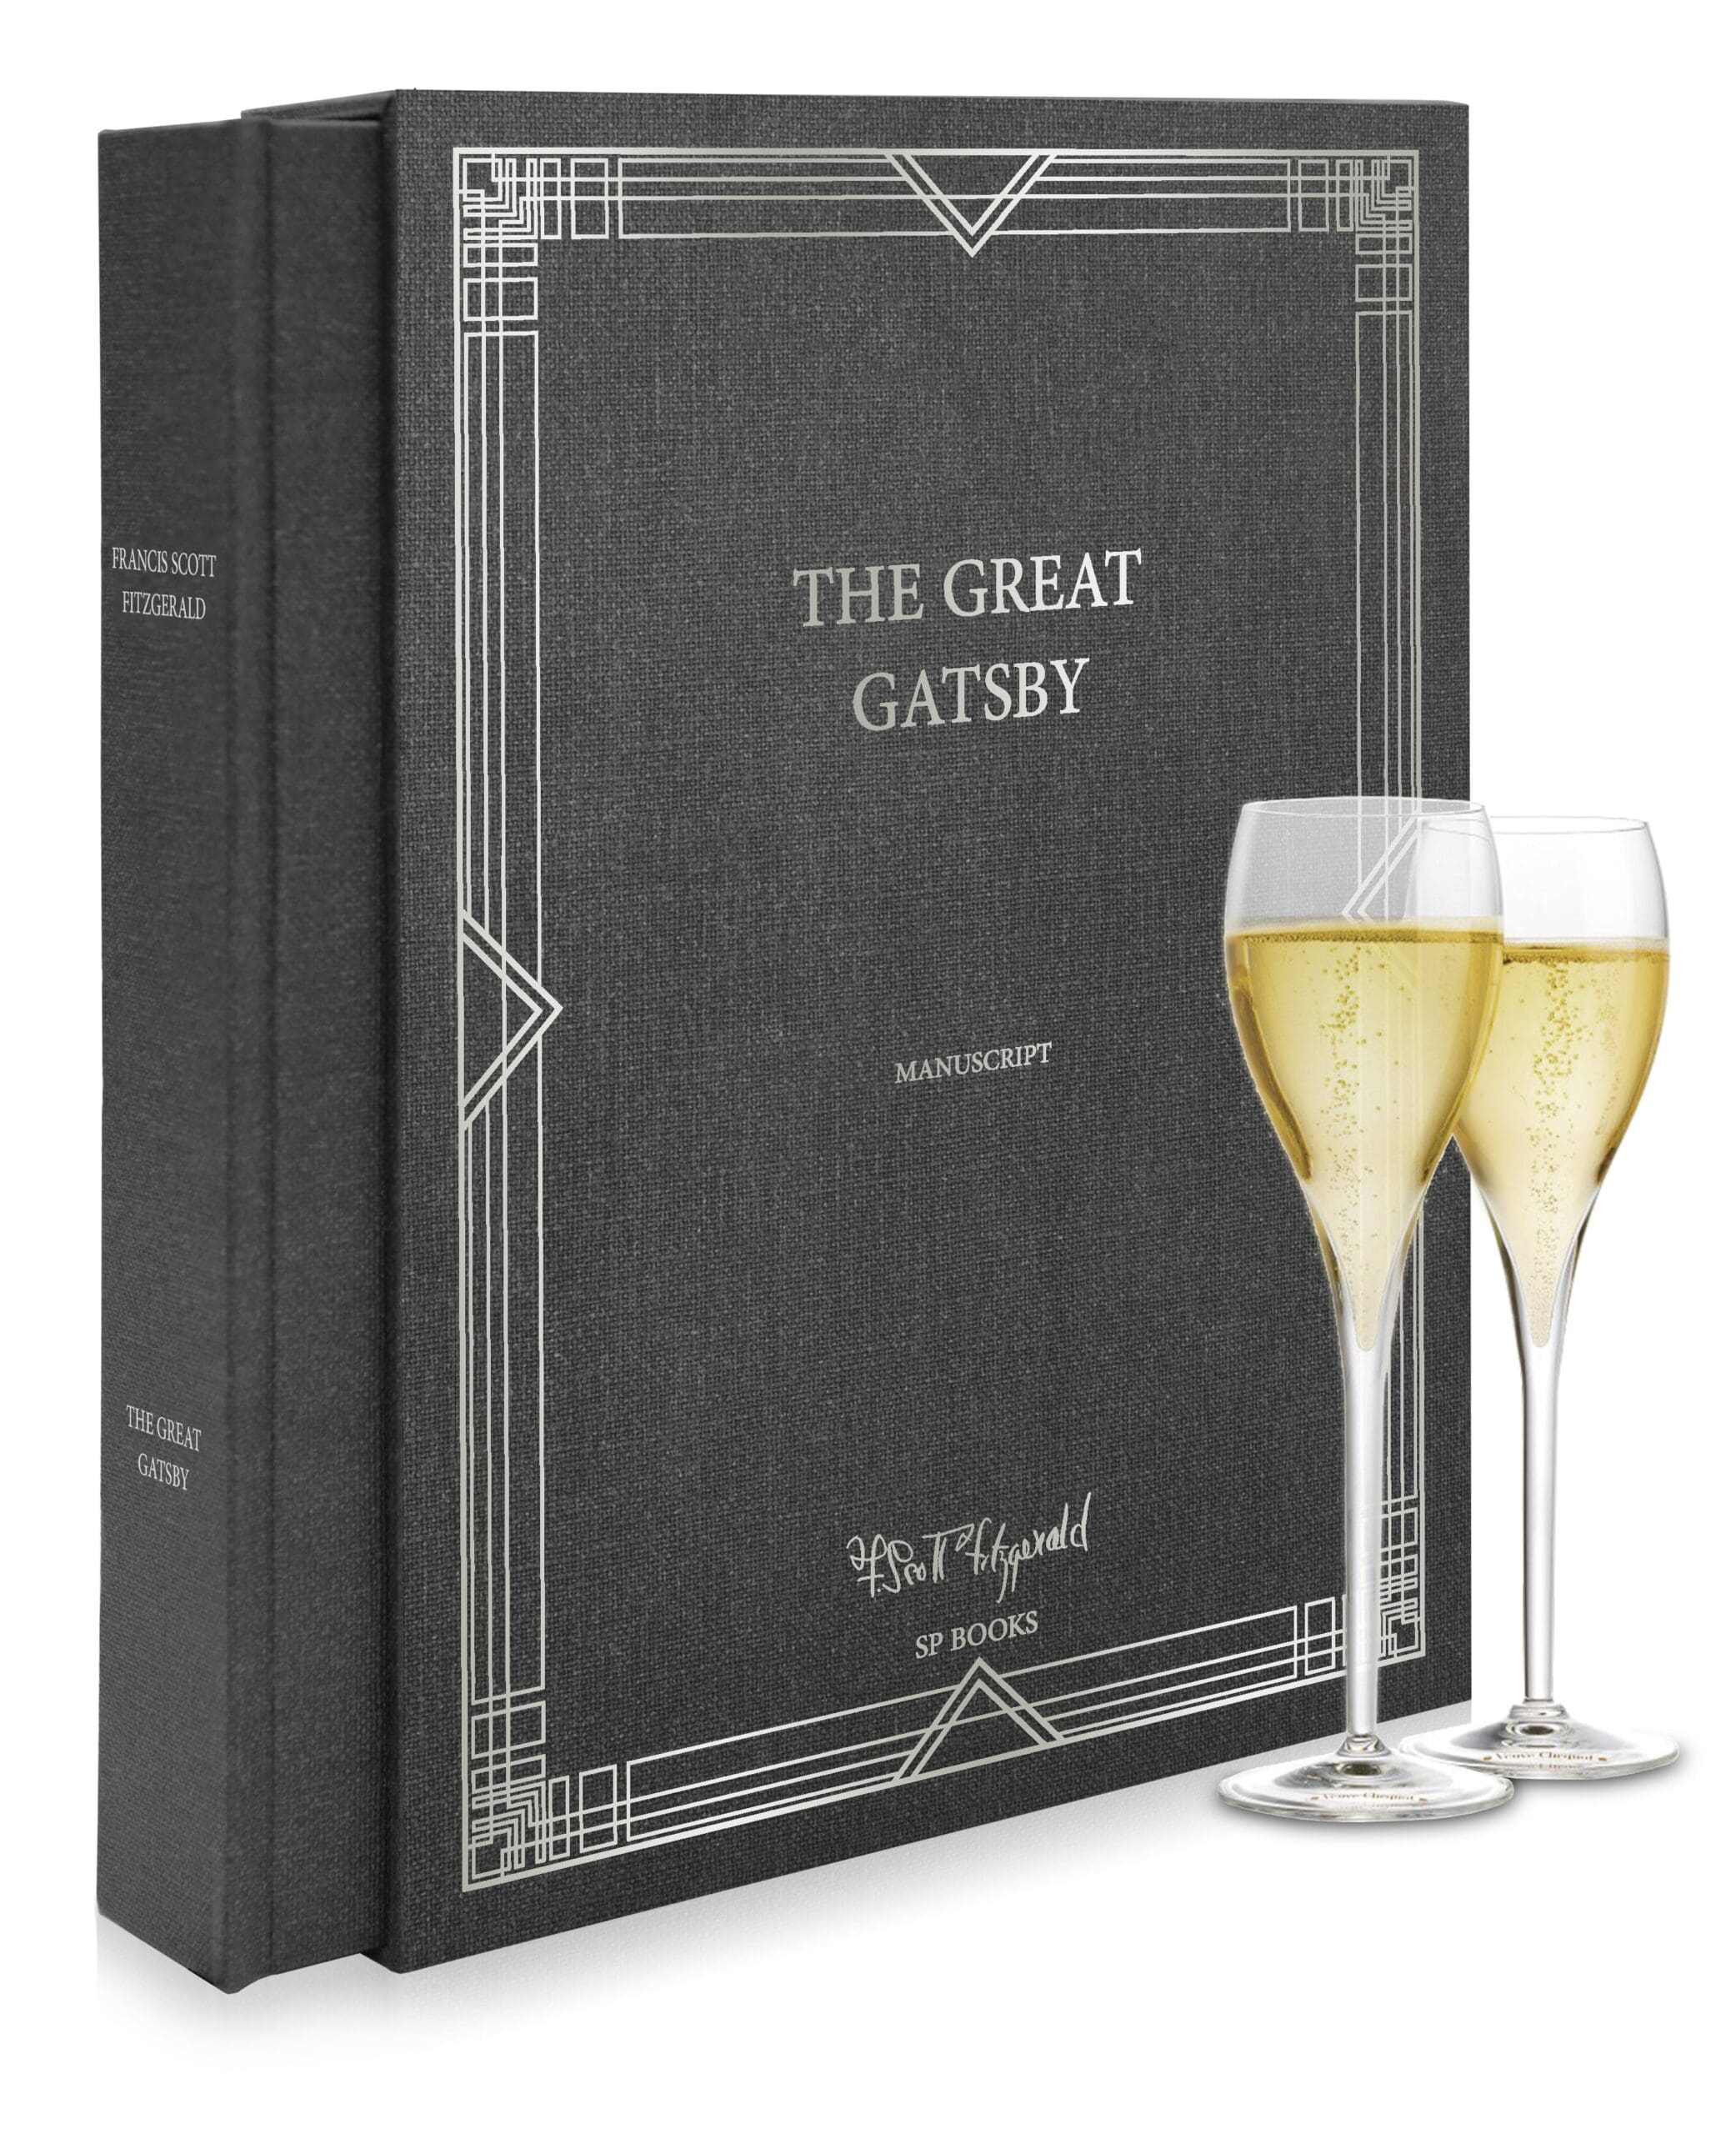 Reputation In The Great Gatsby By F. Scott Fitzgerald